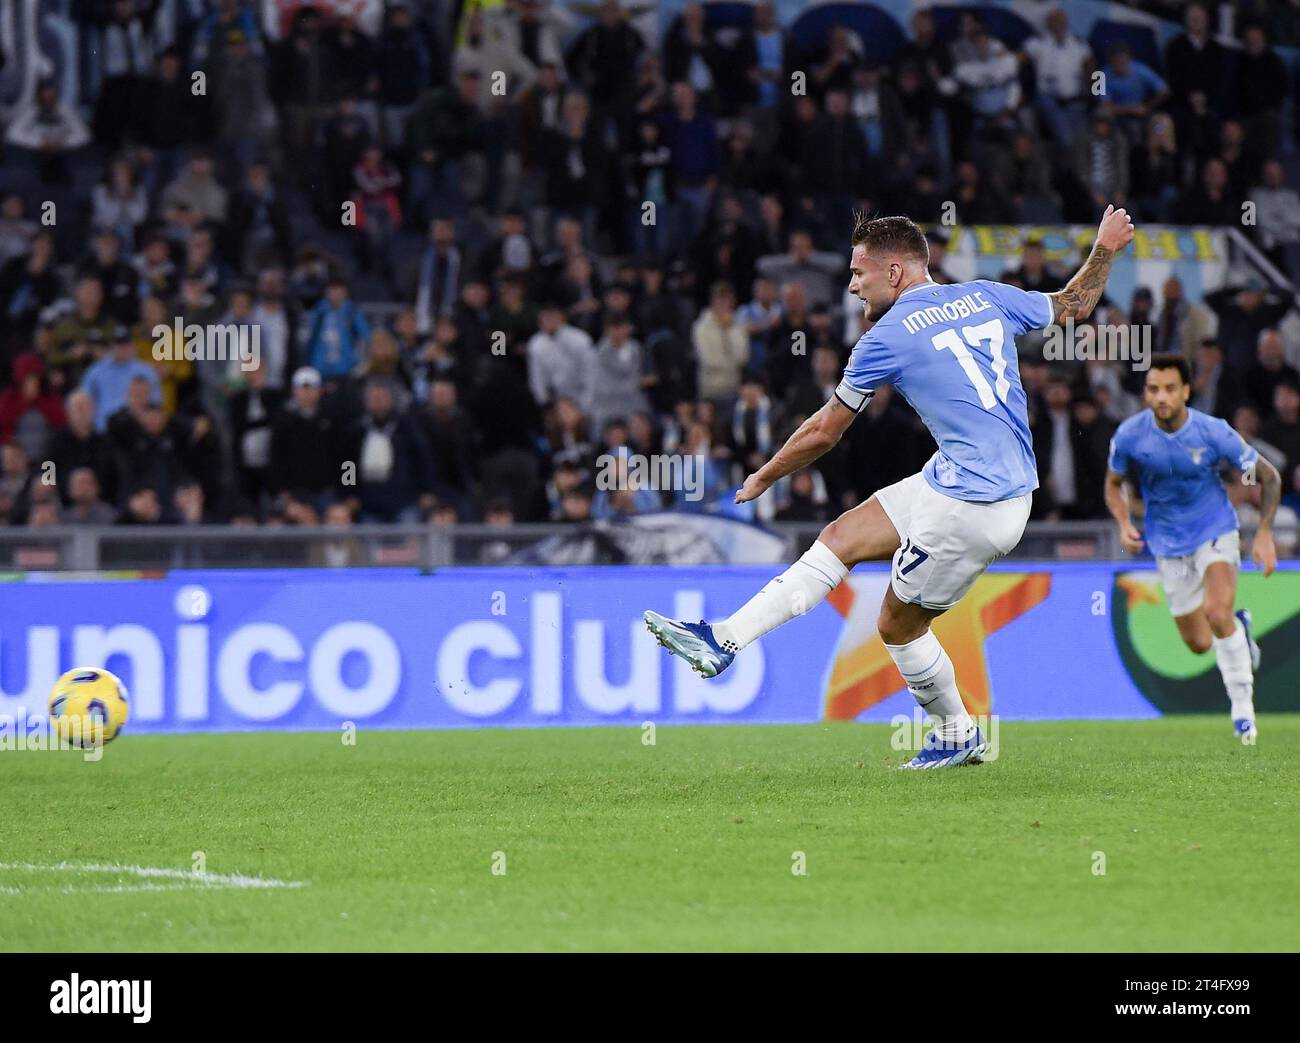 Rome, Italy. 30th Oct, 2023. Lazio's Ciro Immobile scores a penalty during a Serie A soccer match between Lazio and Fiorentina in Rome, Italy, Oct. 30, 2023. Credit: Alberto Lingria/Xinhua/Alamy Live News Stock Photo